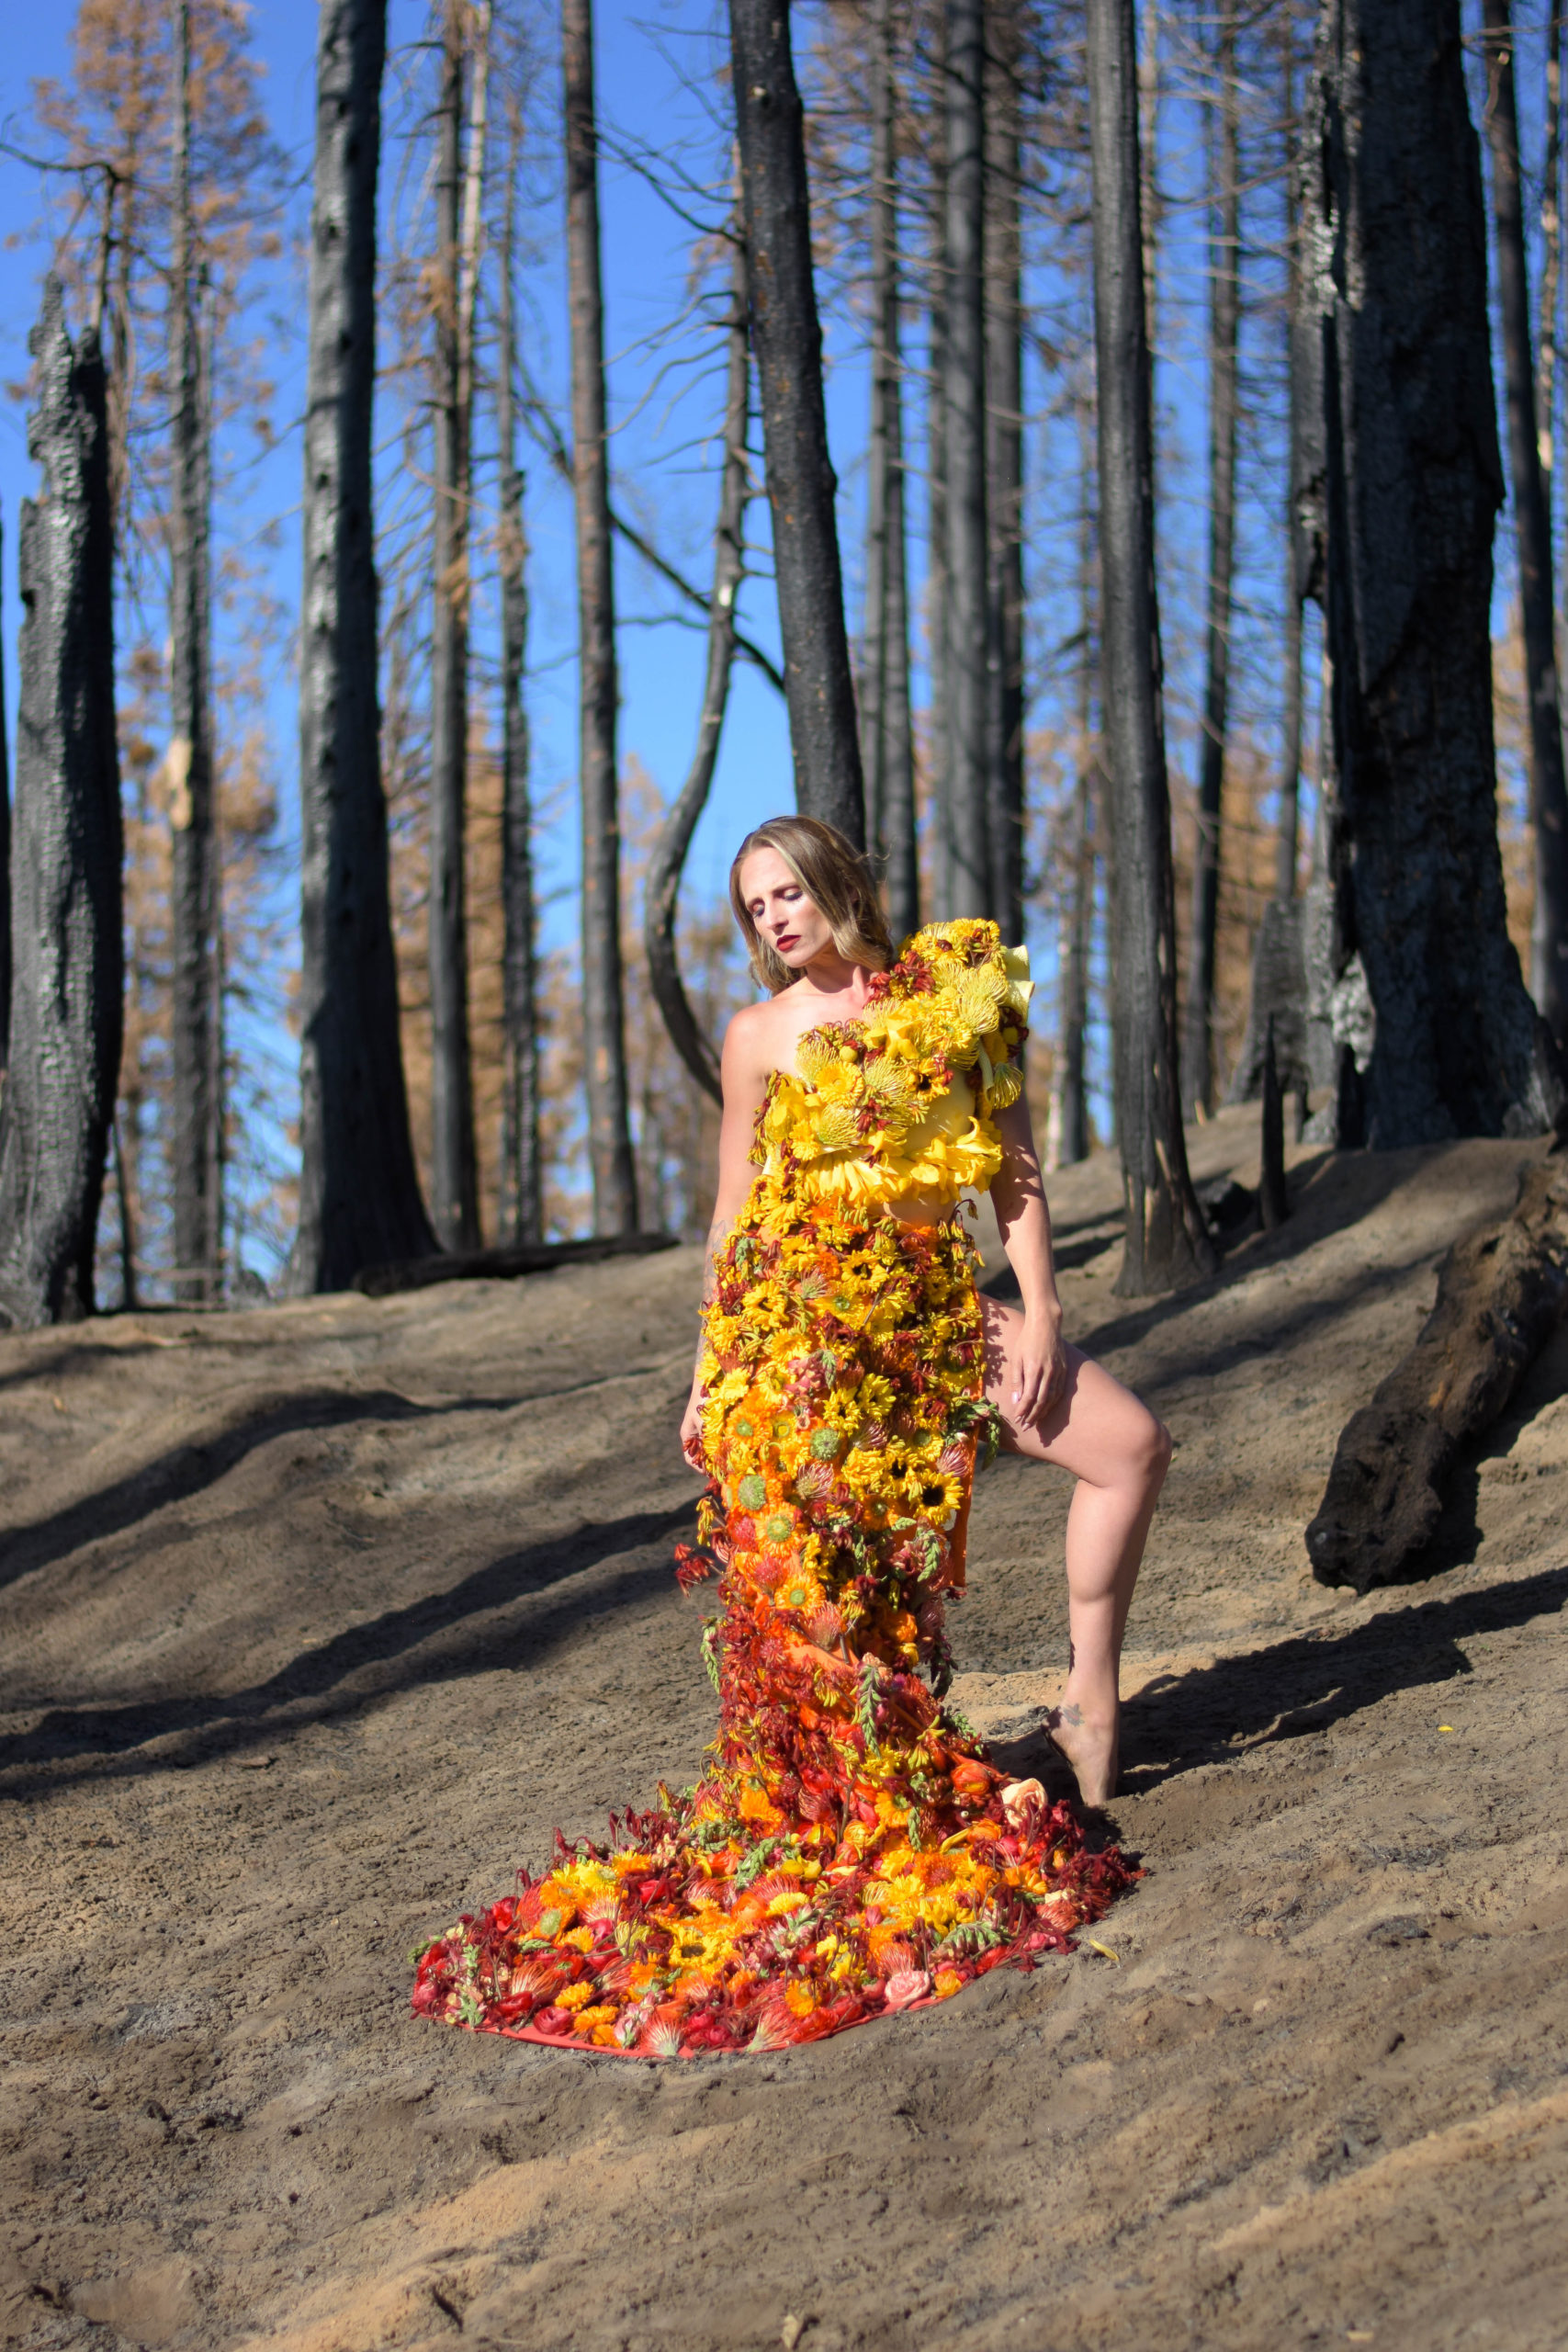 Botanical Couture Dress by Jenny Diaz for American Flower Week